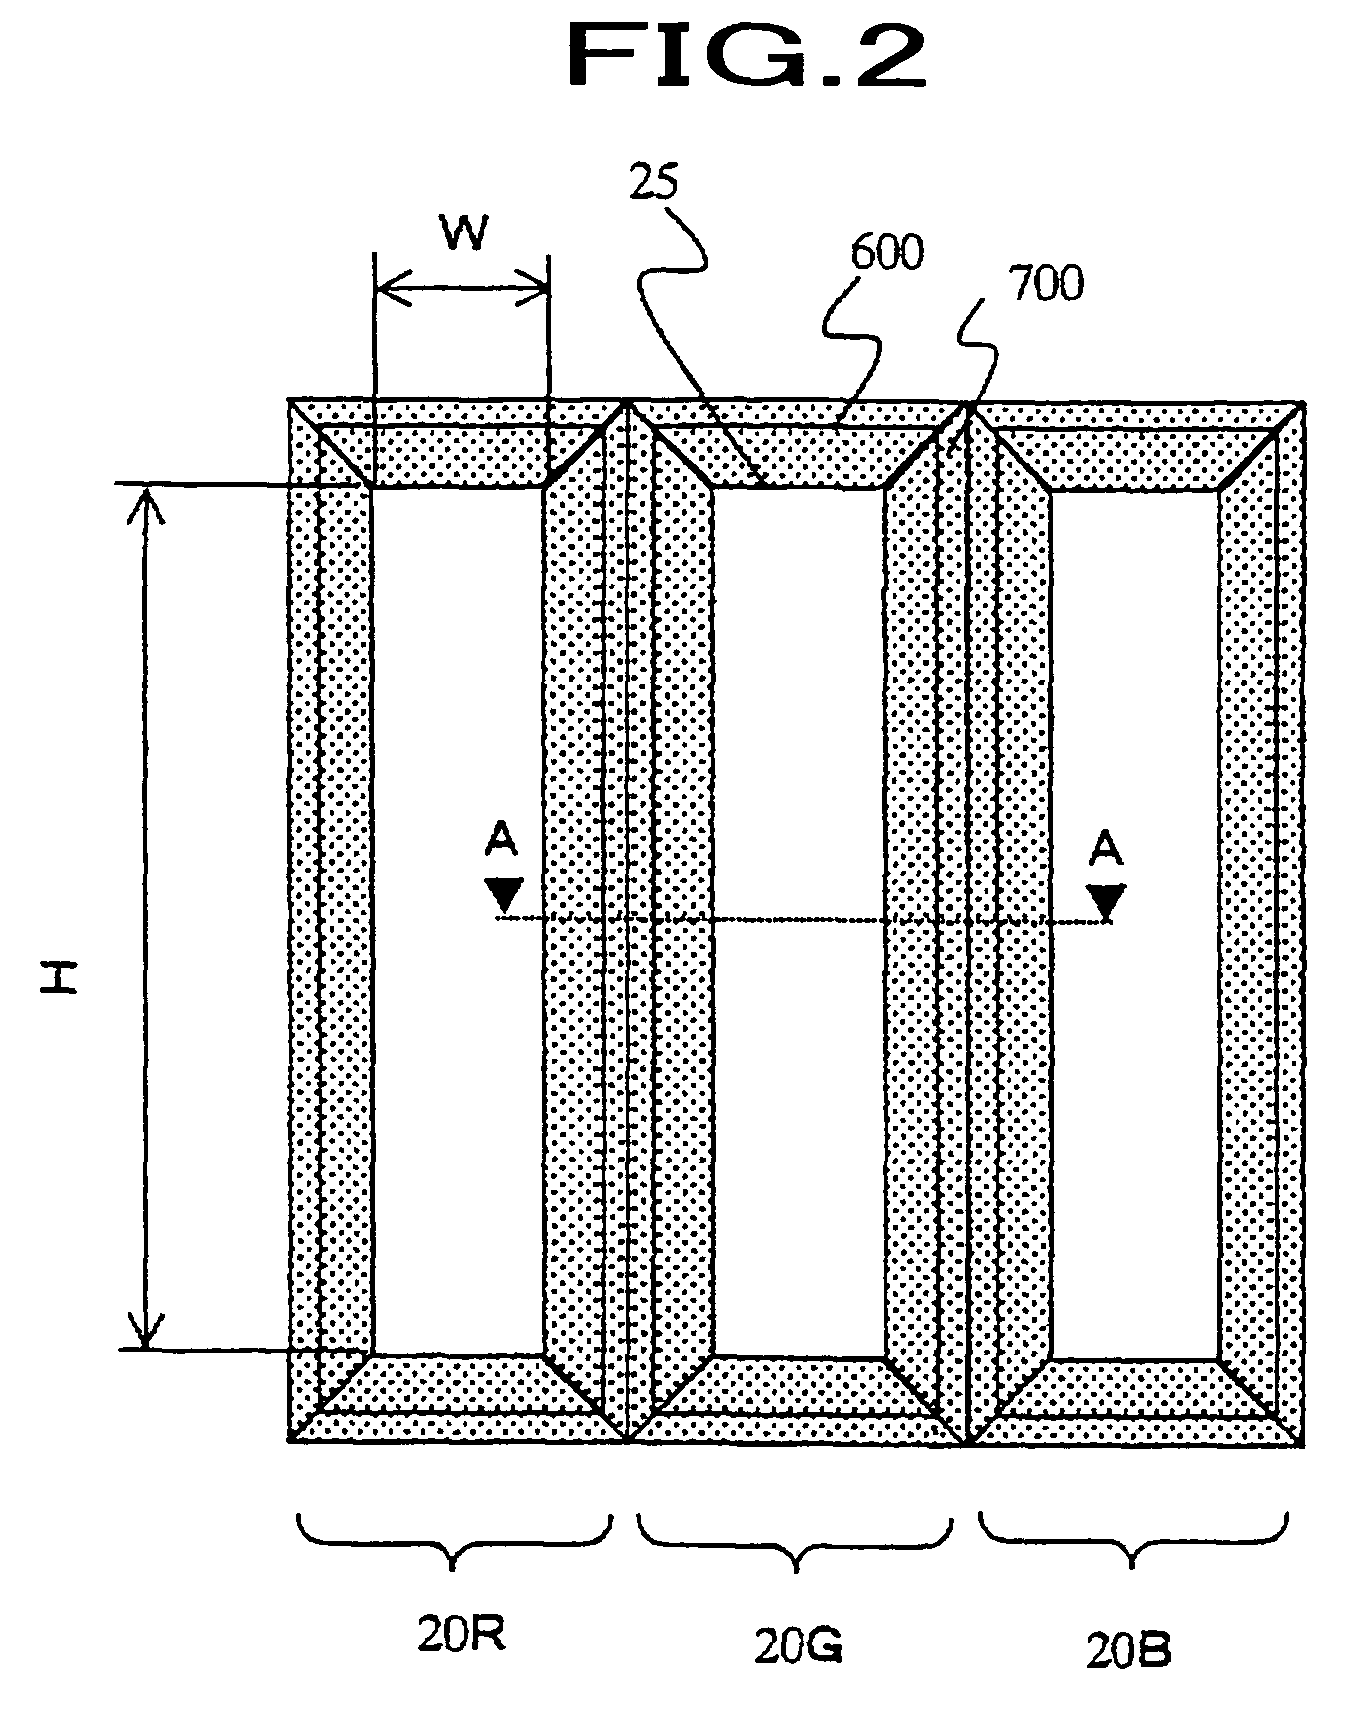 Light emitting device with an incorporated optical wavelight layer